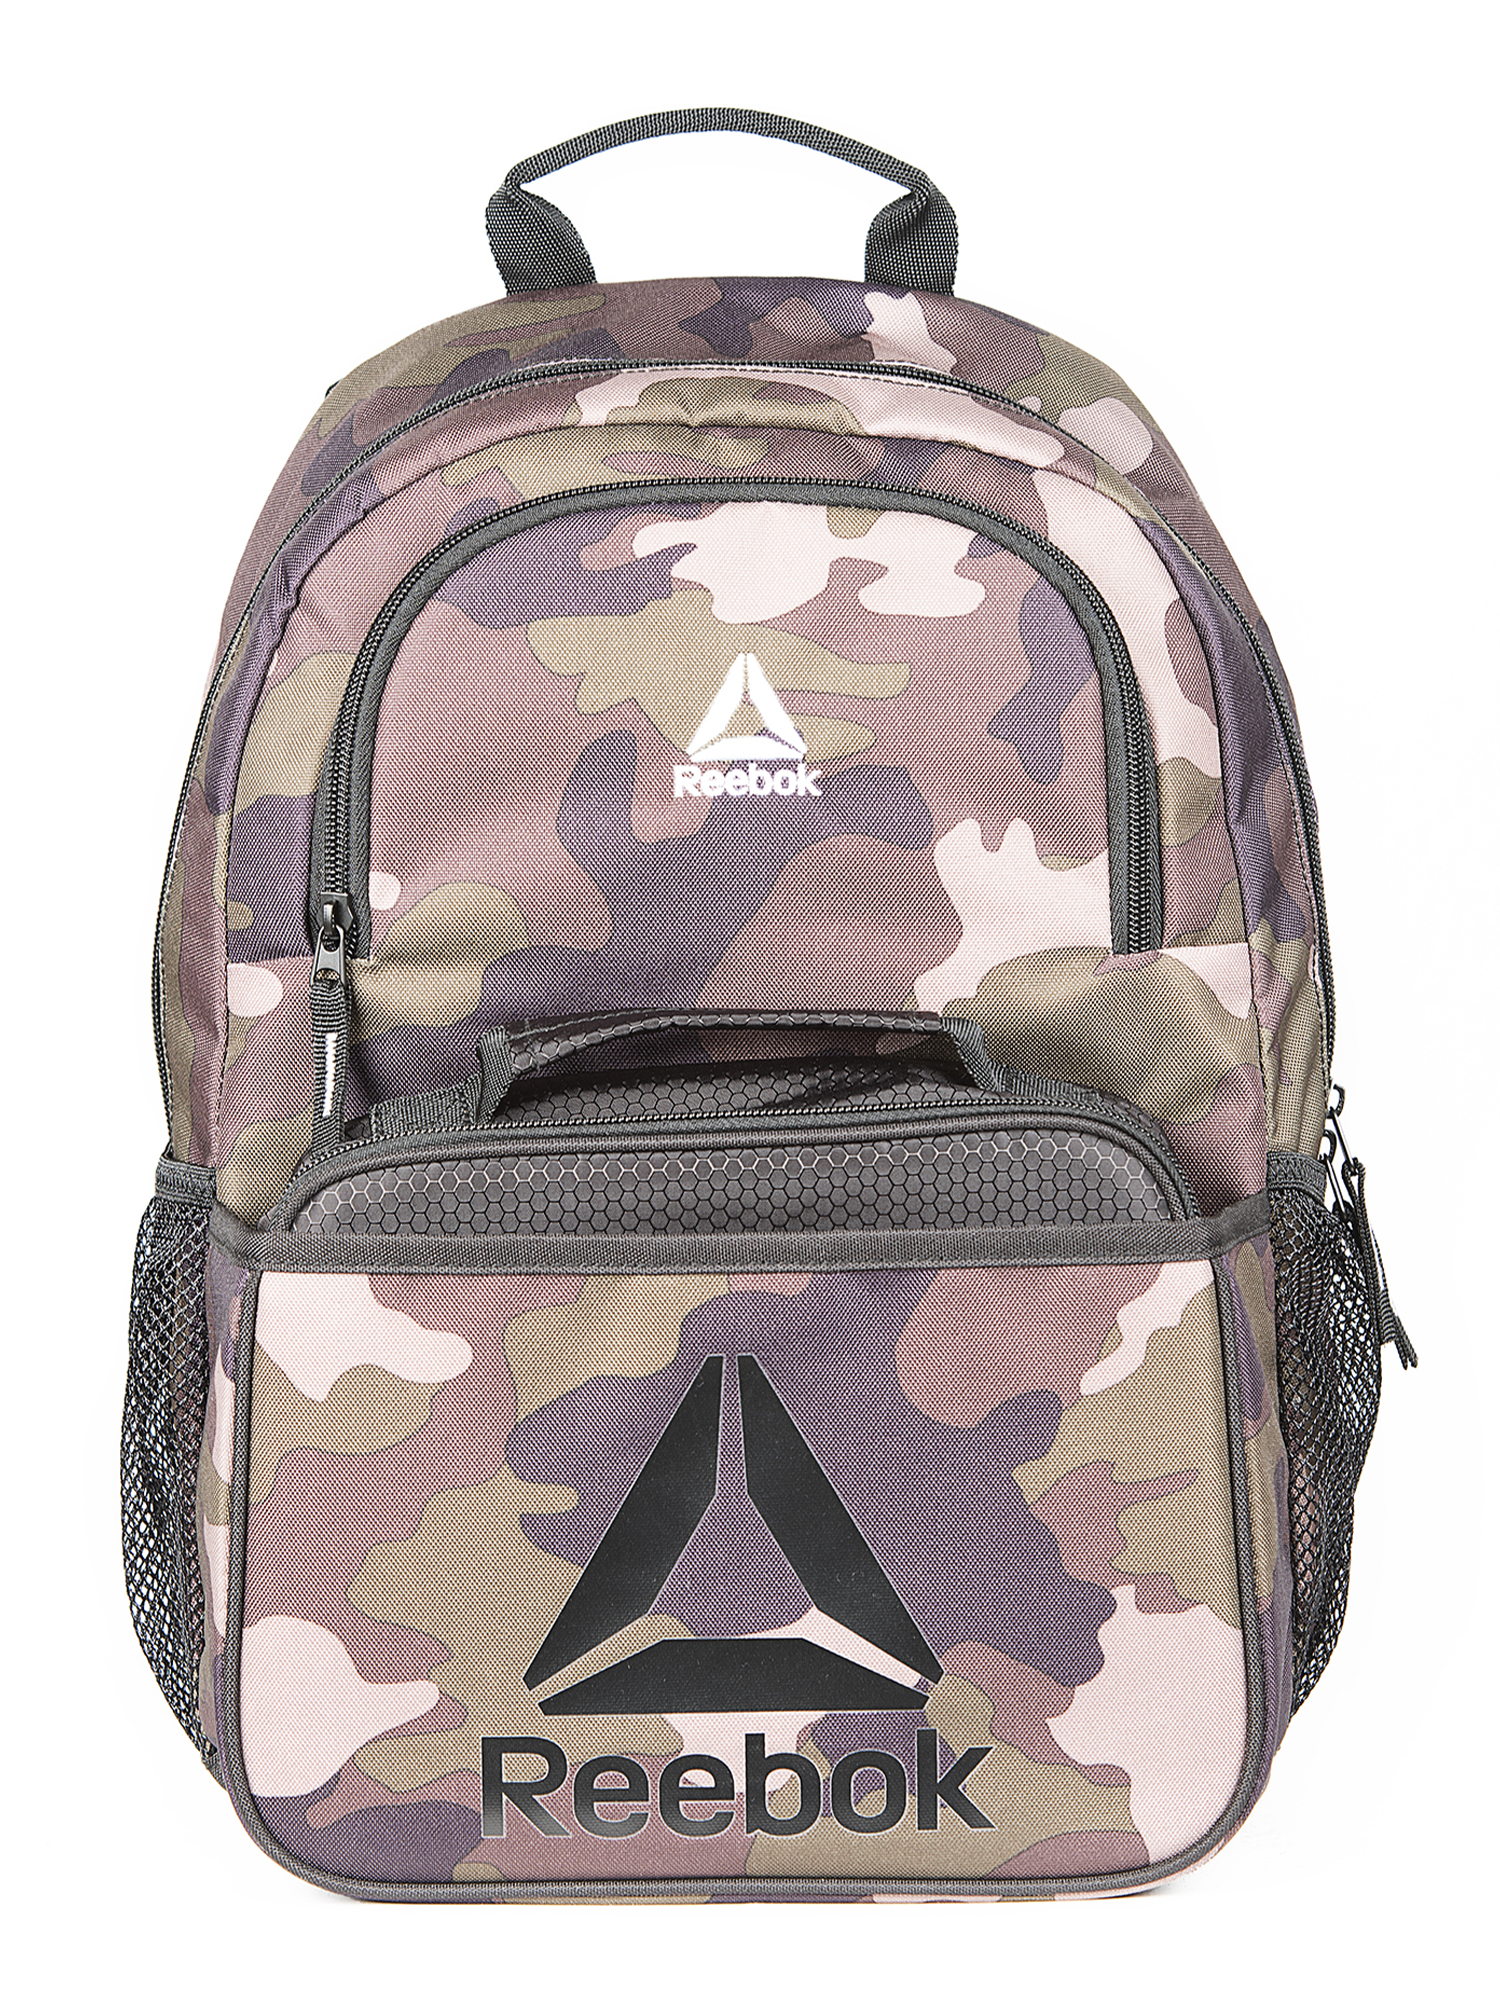 Reebok Unisex Riley Backpack with Lunch Box - Army Camo - image 1 of 4